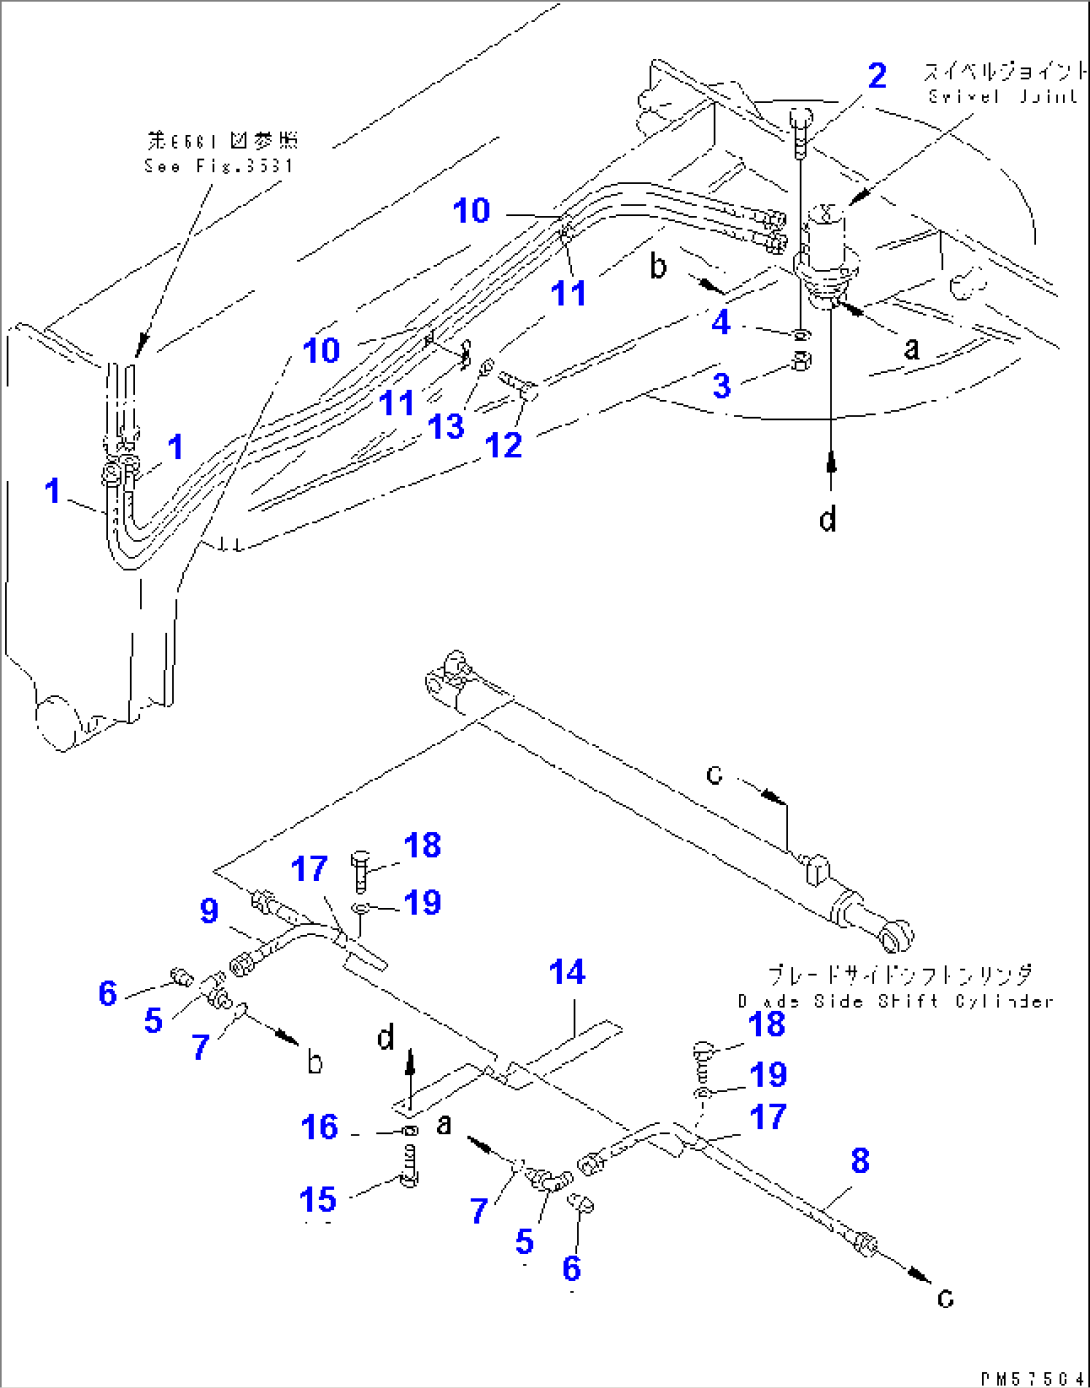 HYDRAULIC PIPING (BLADE SIDE SHIFT CYLINDER LINE) (2/2)